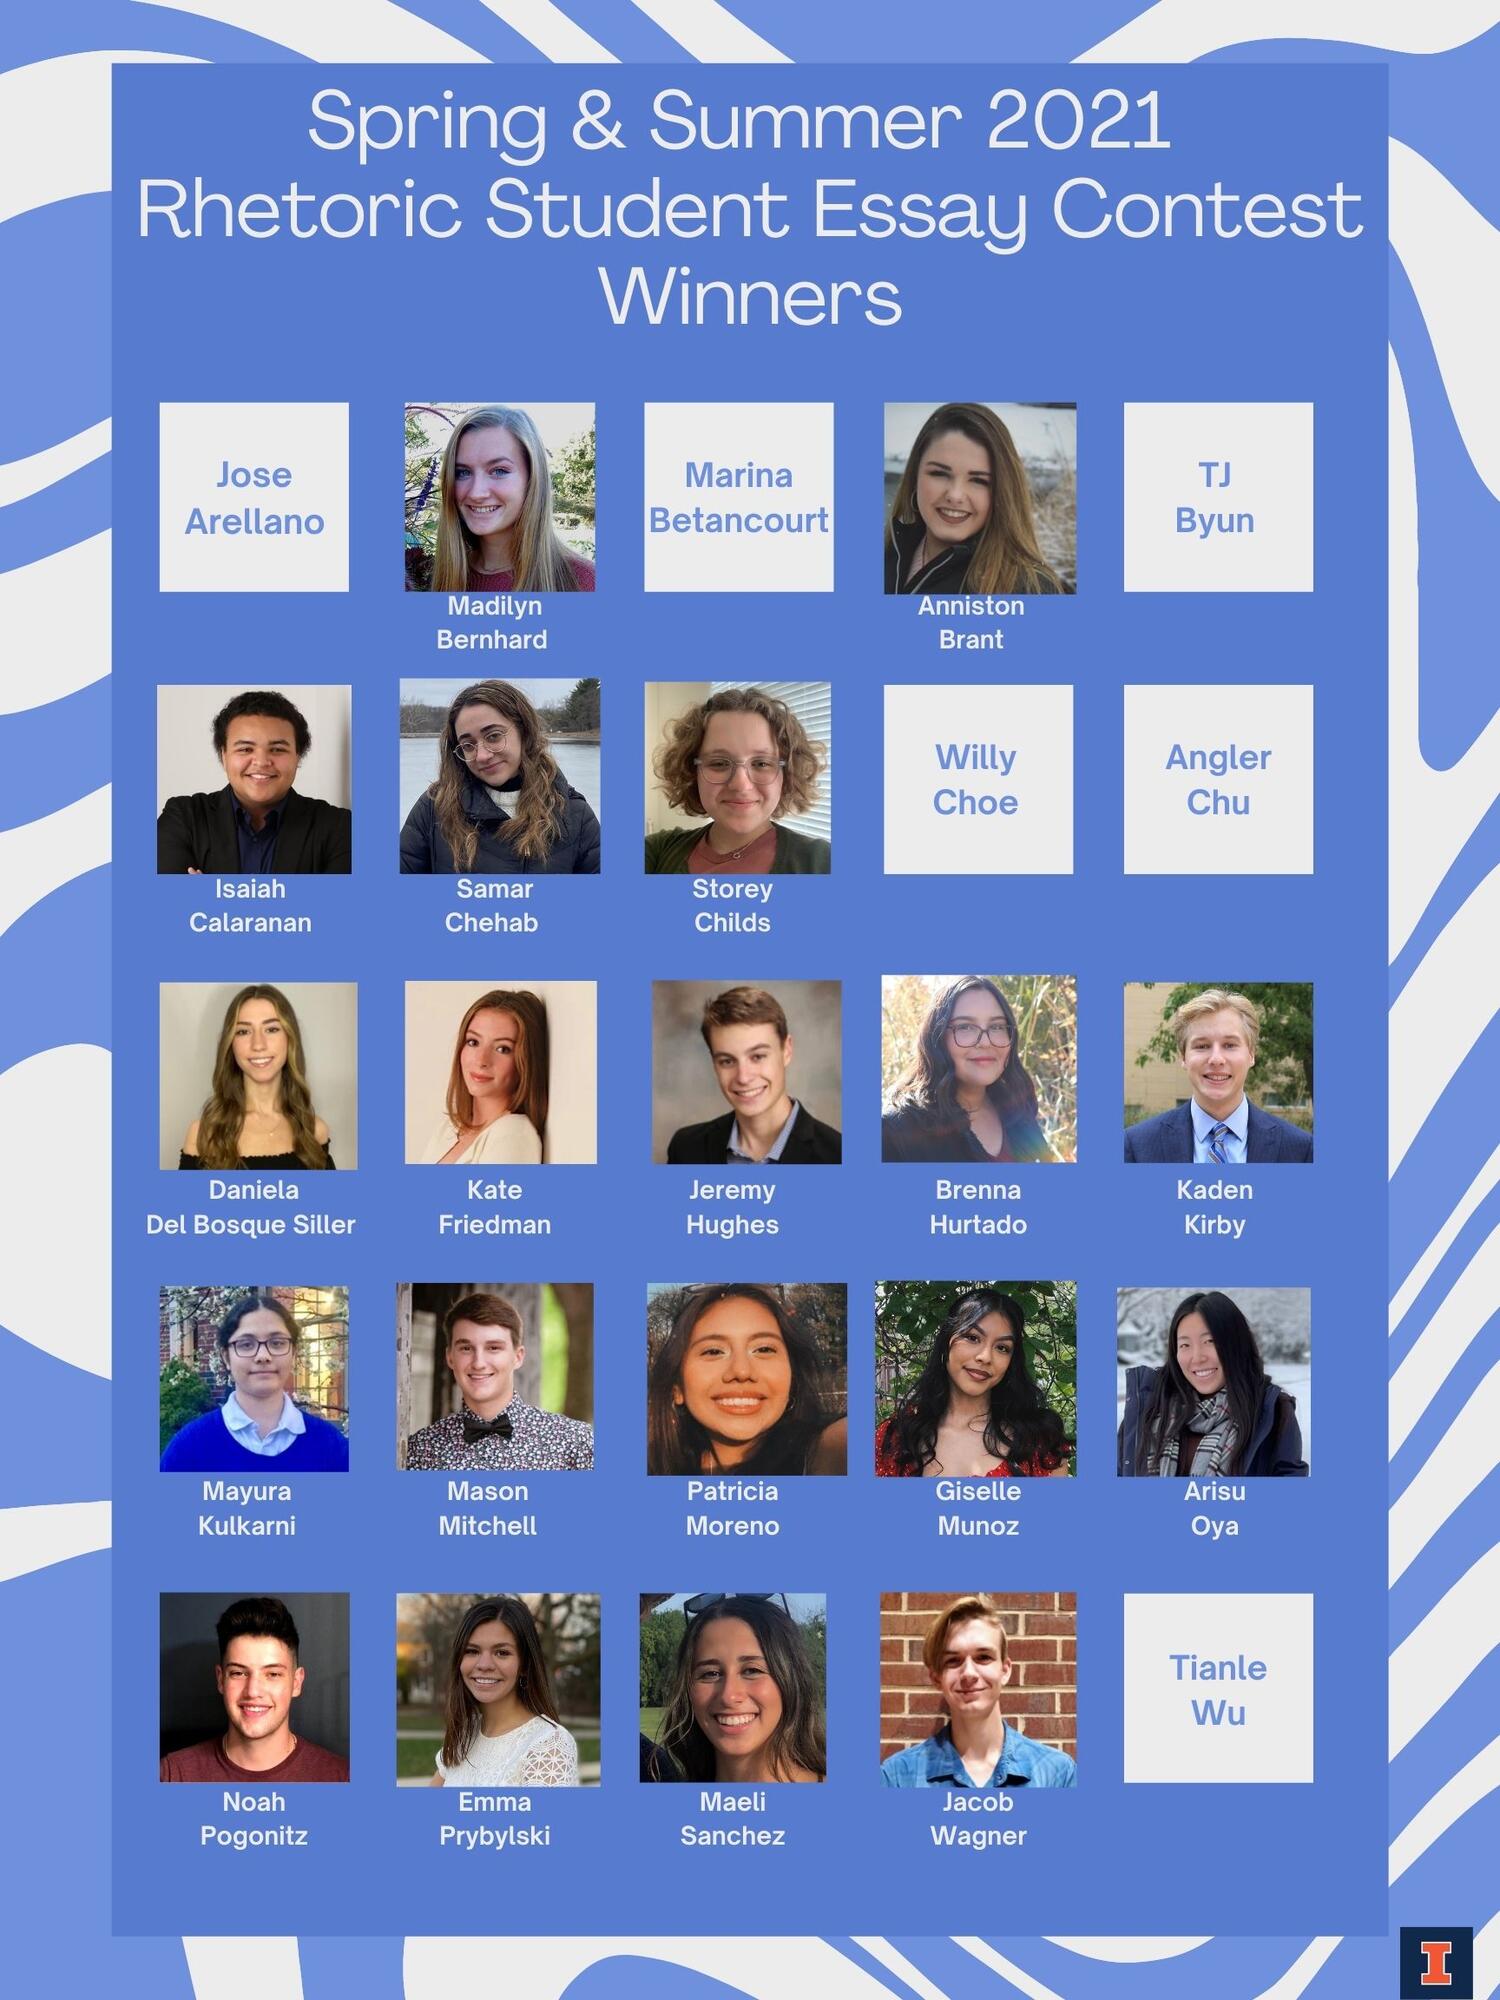 A collage of the spring and summer 2021 rhetoric student essay contest winners.